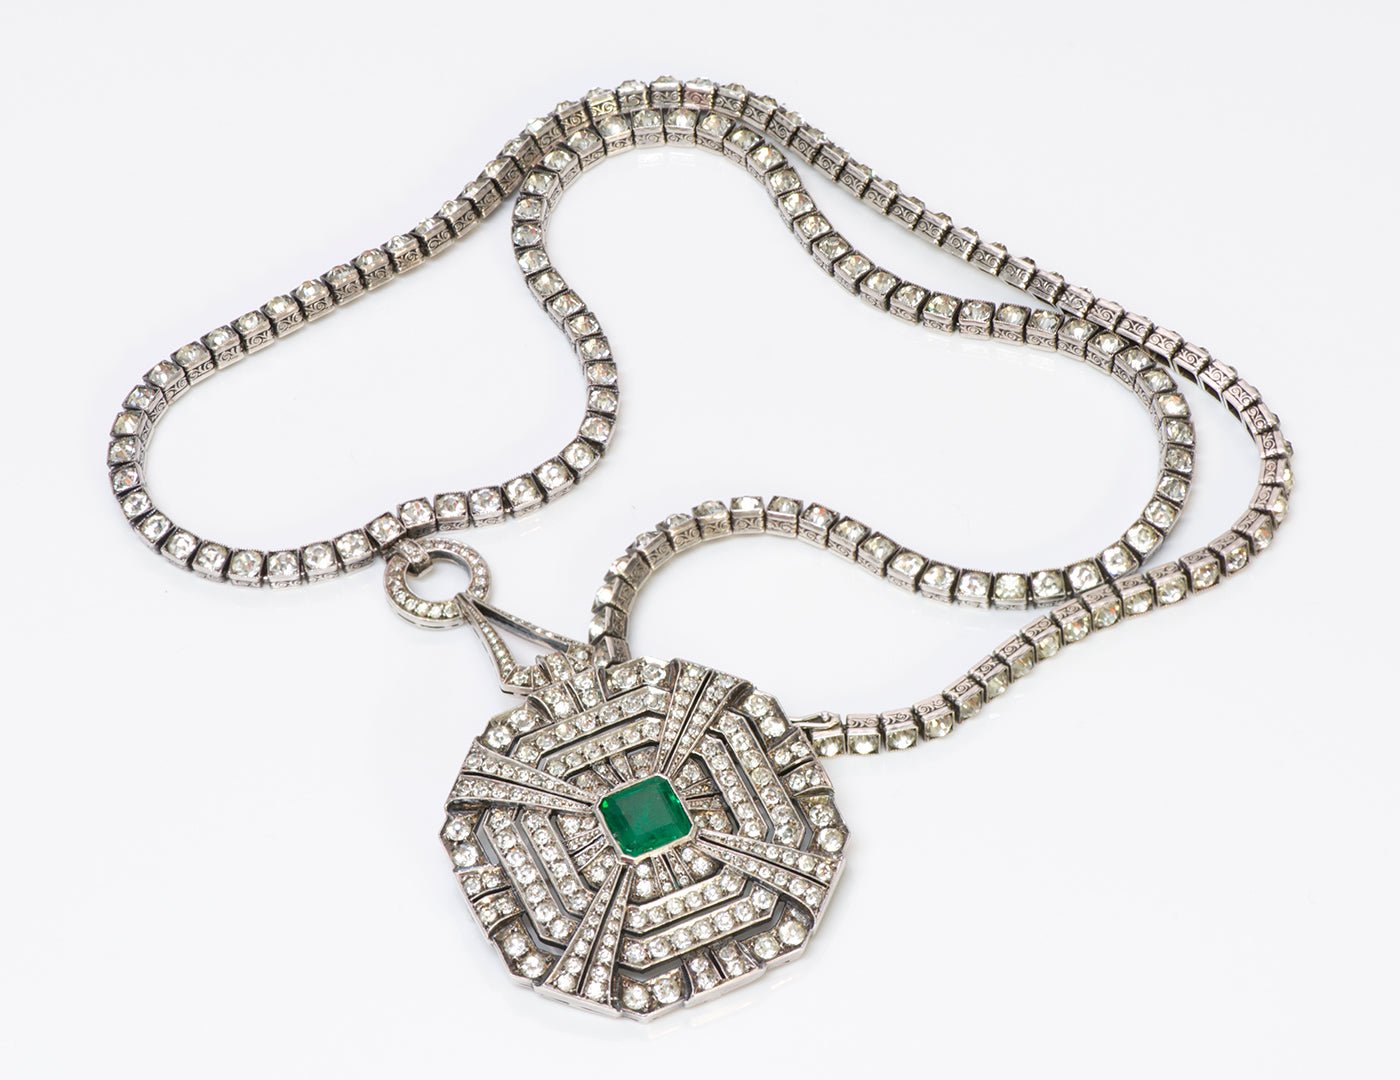 Art Deco 935 Sterling Silver Faux Emerald Paste Pendant Necklace/Brooch - DSF Antique Jewelry